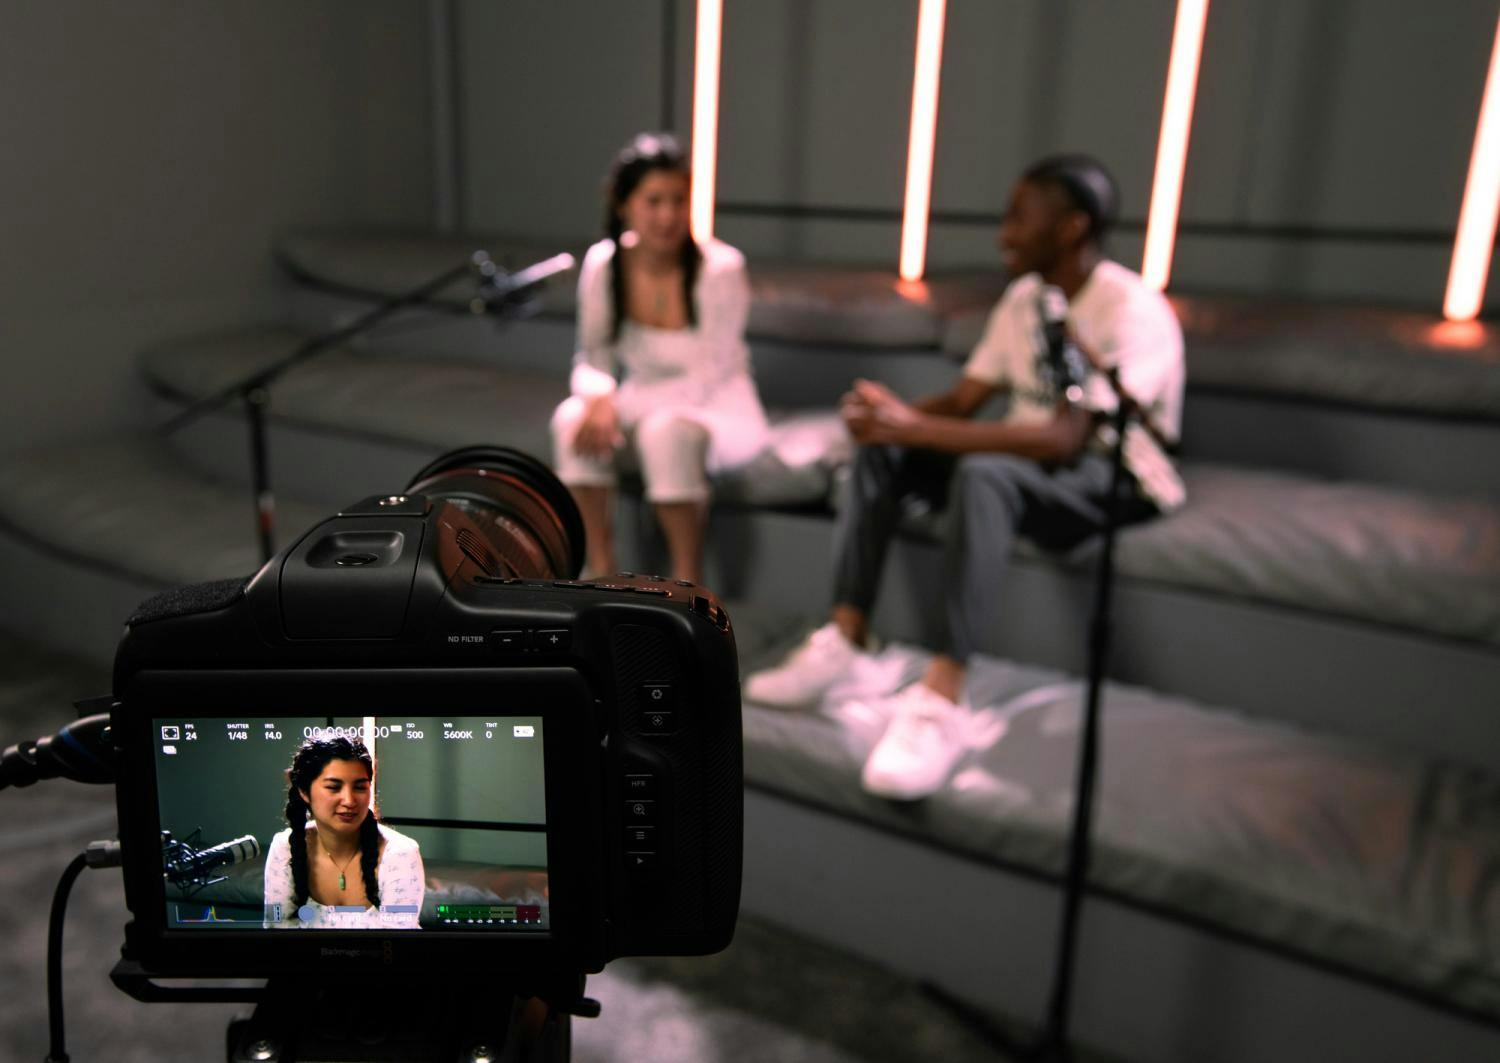 A camera focuses on a female interviewee in a modern studio with neon lights and a soft gray background.